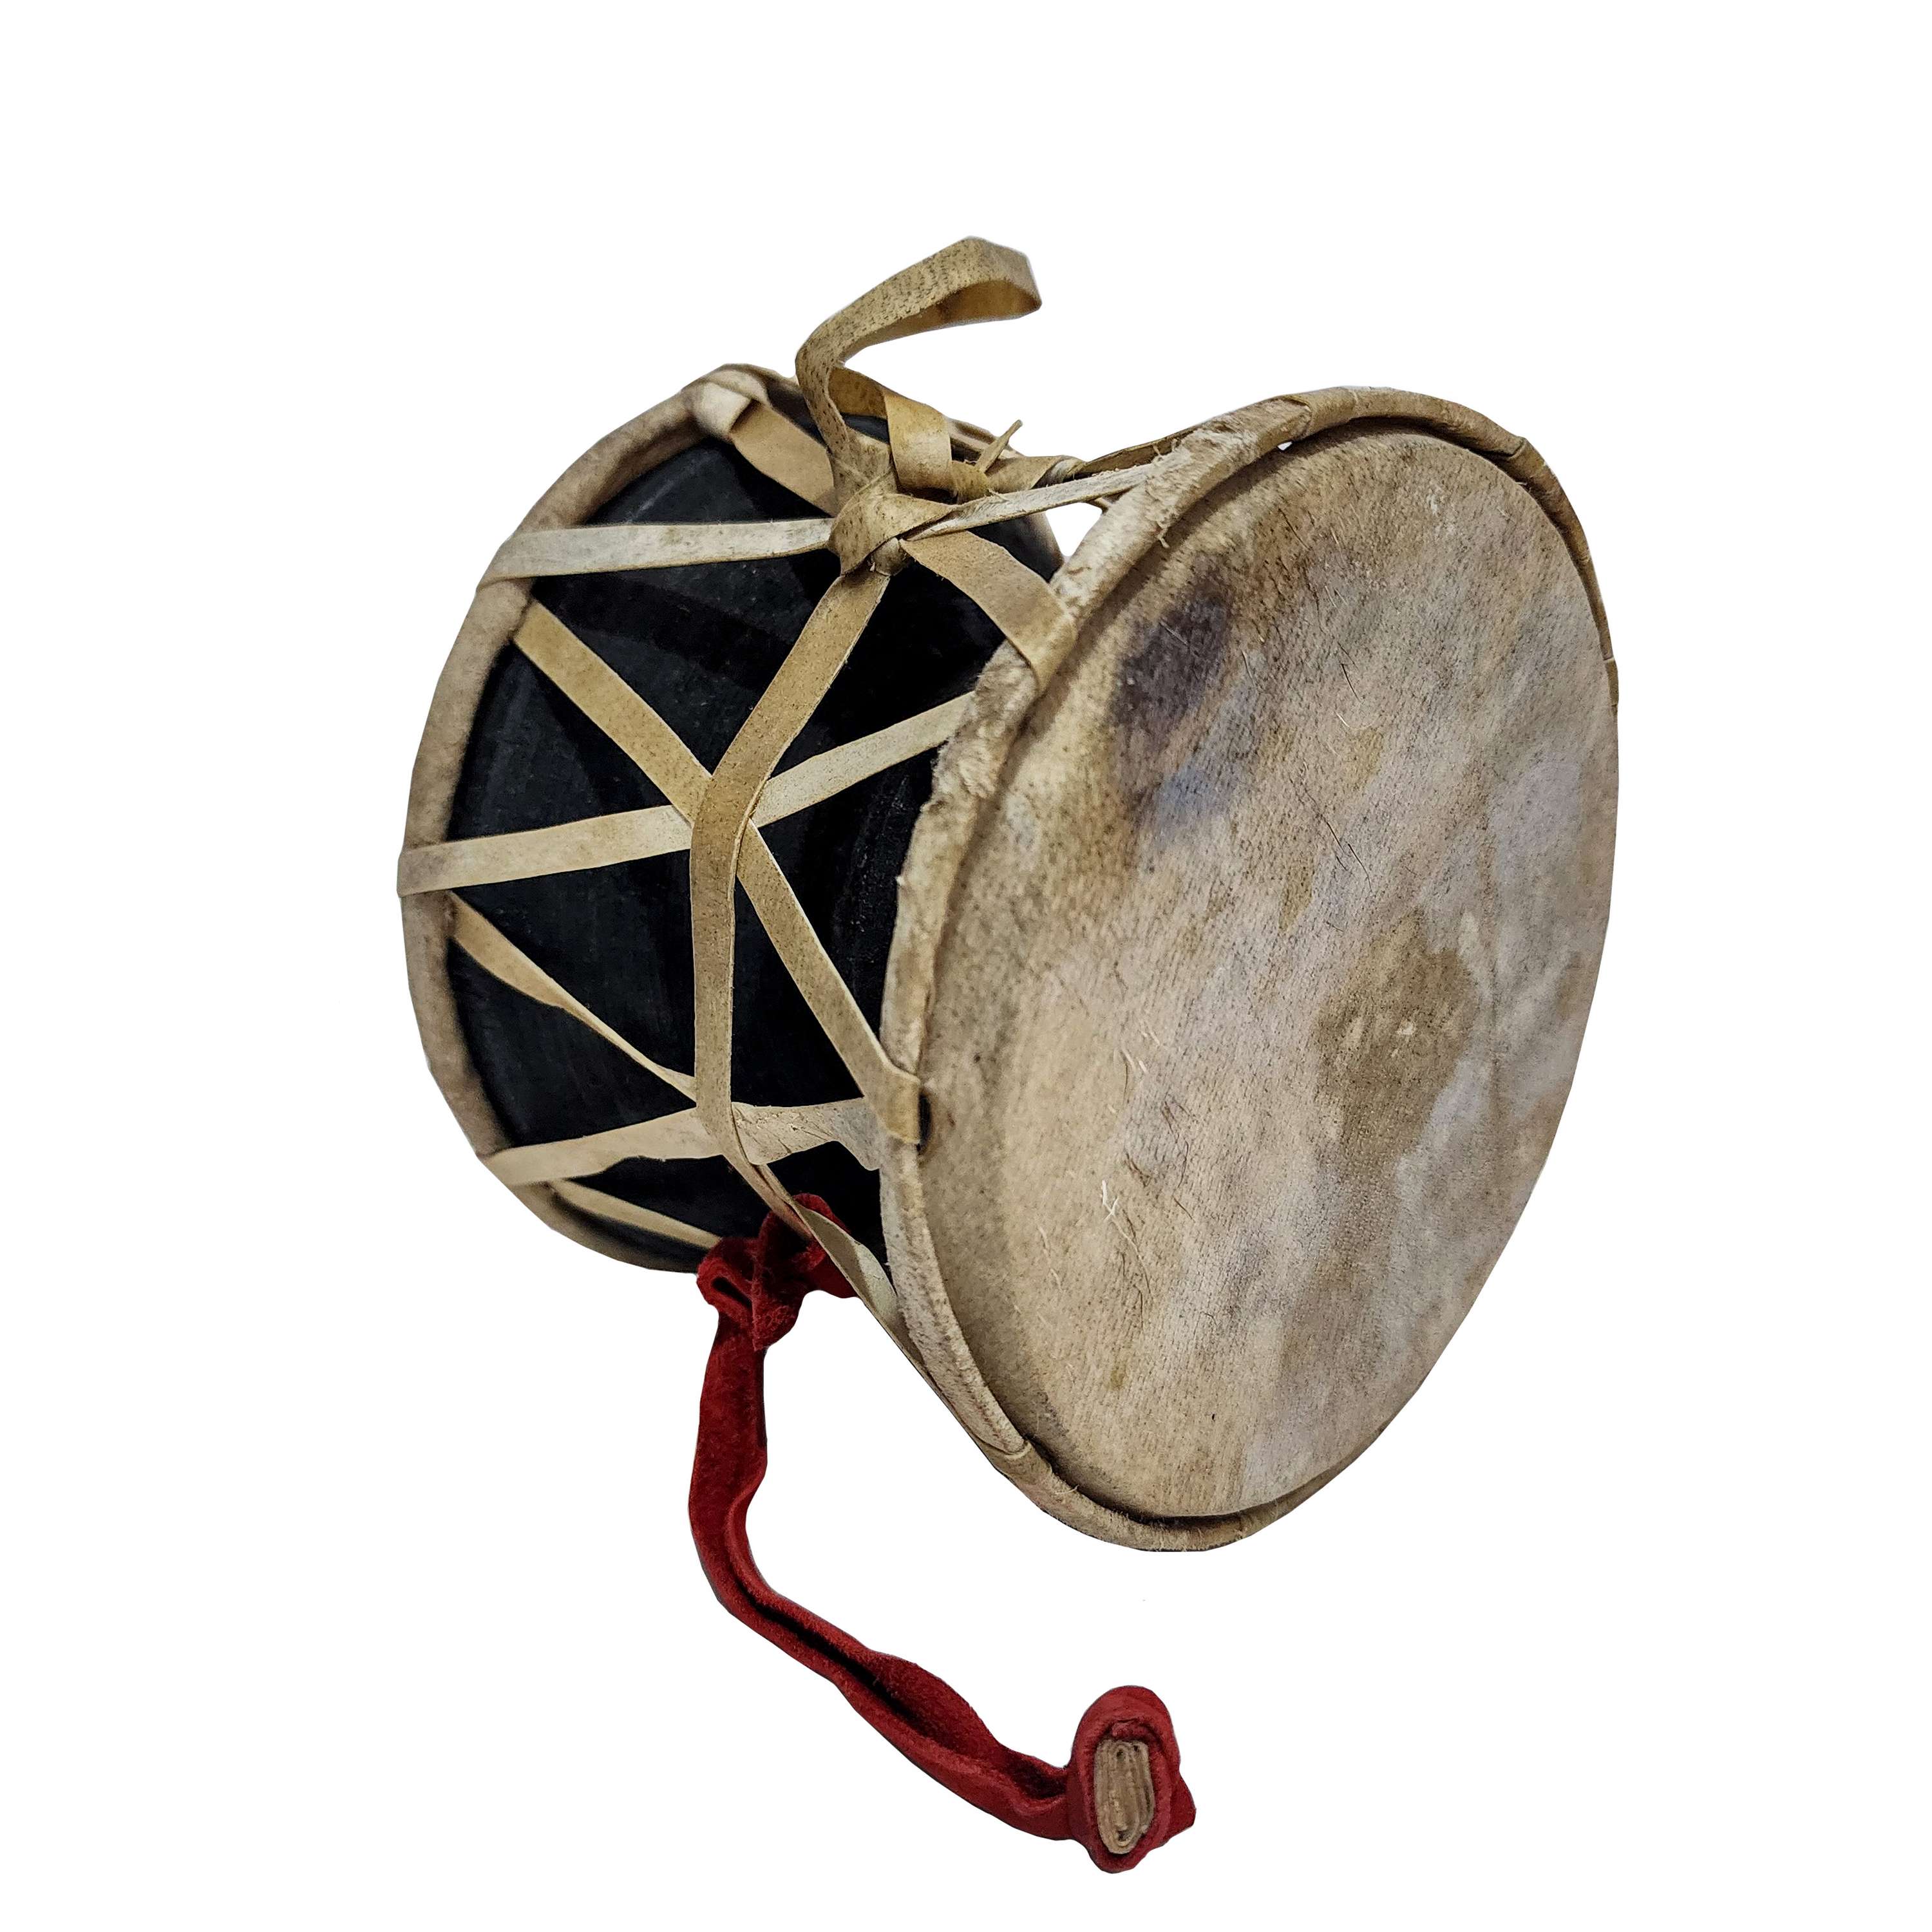 High Quality Nepali Folk Musical Instrument damaru, Musical Instrument To Many Religious Practice, Made On Copper Base